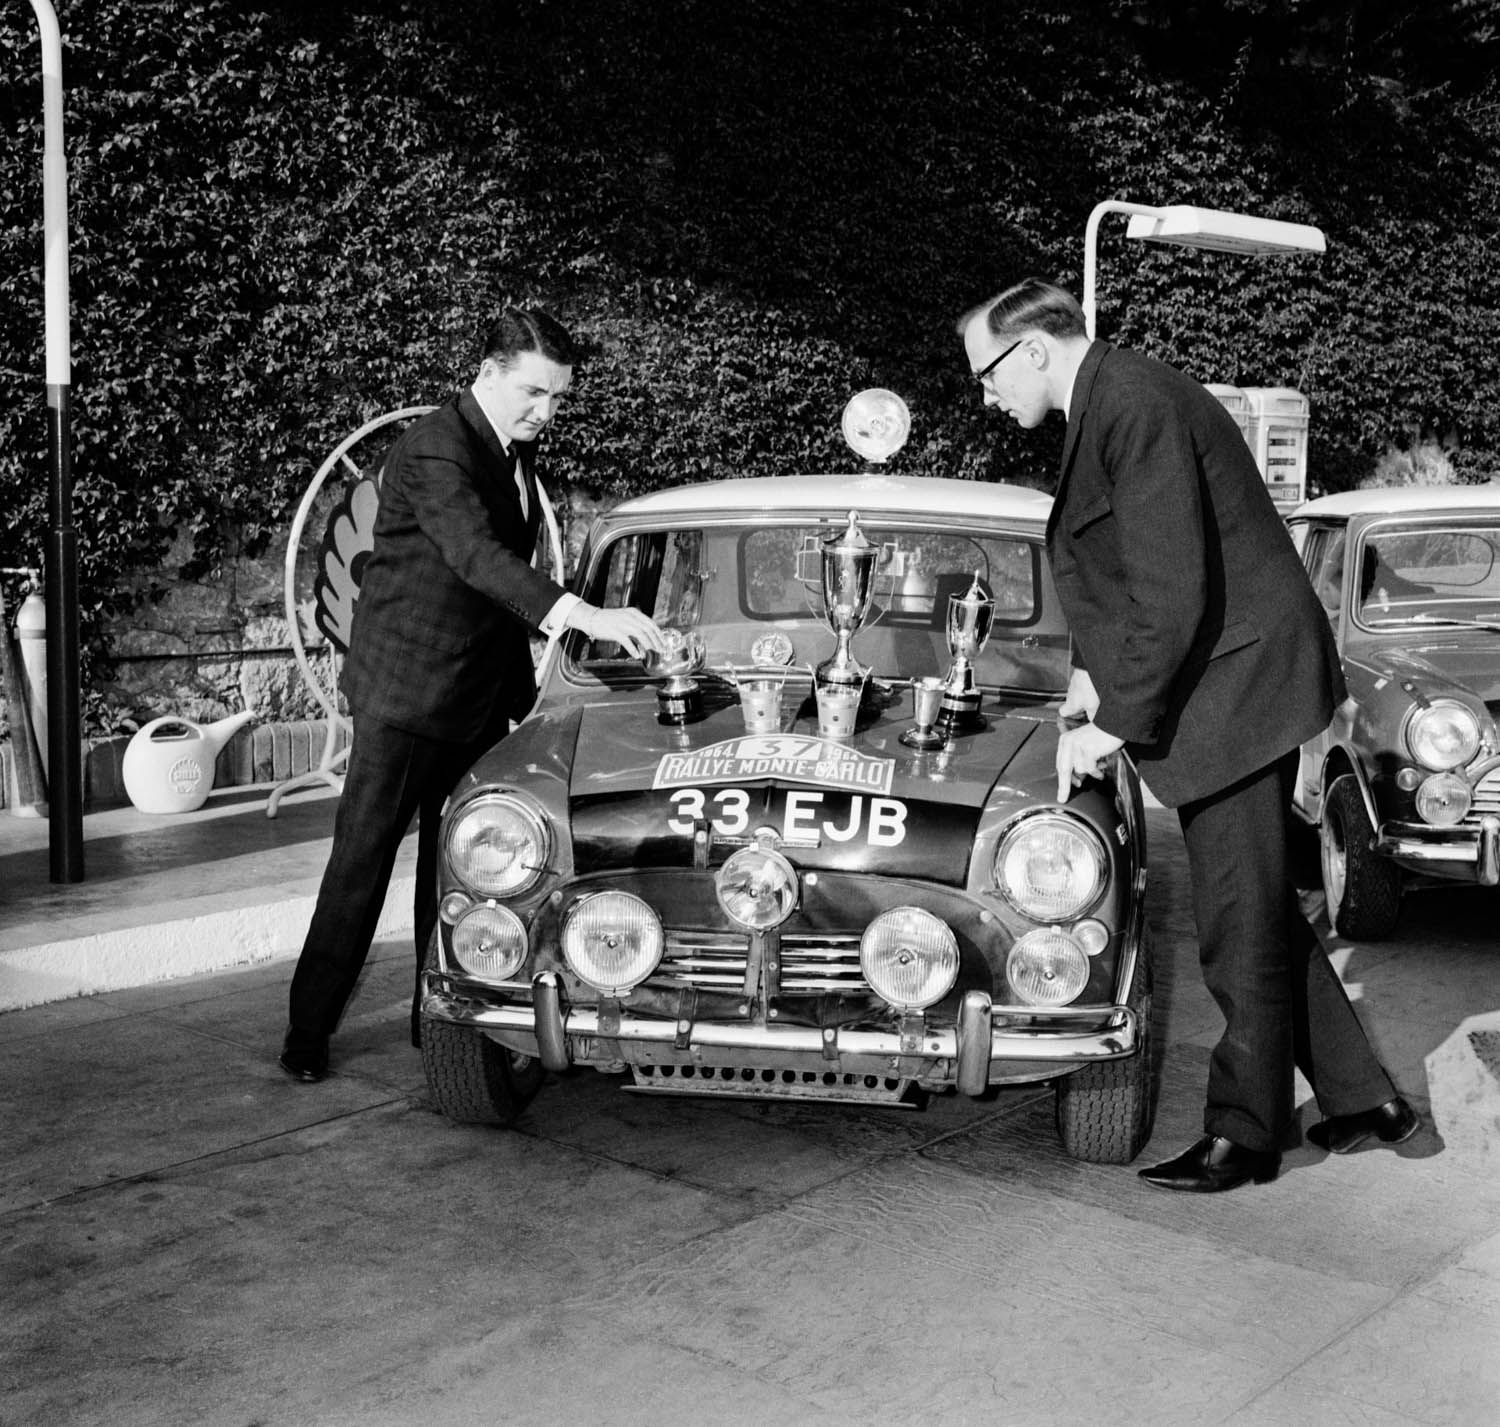 THE ORIGINAL CHAMPION: The Mini Cooper S that Paddy Hopkirk drove to victory in the 1964 Monte Carlo Rally will go on show this Sunday at London Waterloo Station. (copyright British Motor Museum)